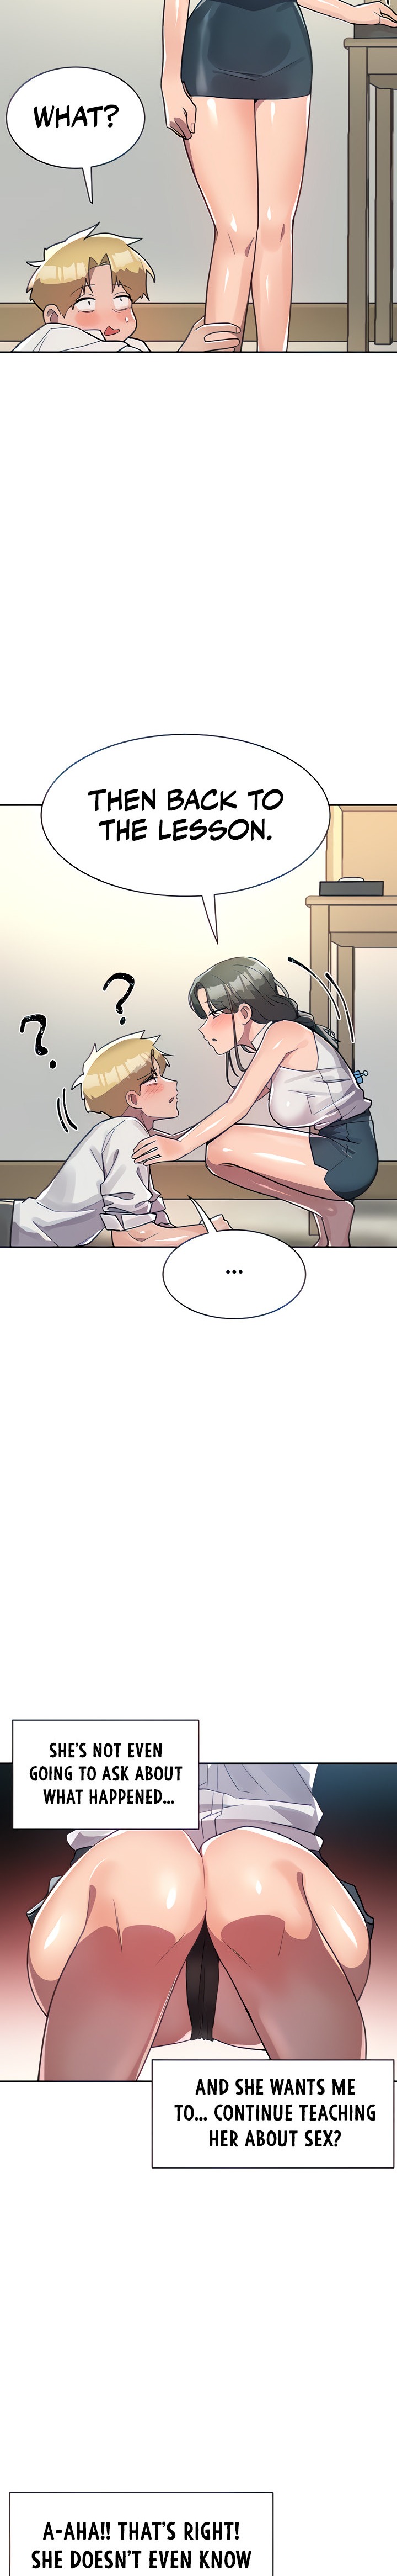 Relationship Reverse Button: Let’s Educate That Arrogant Girl - Chapter 5 Page 2